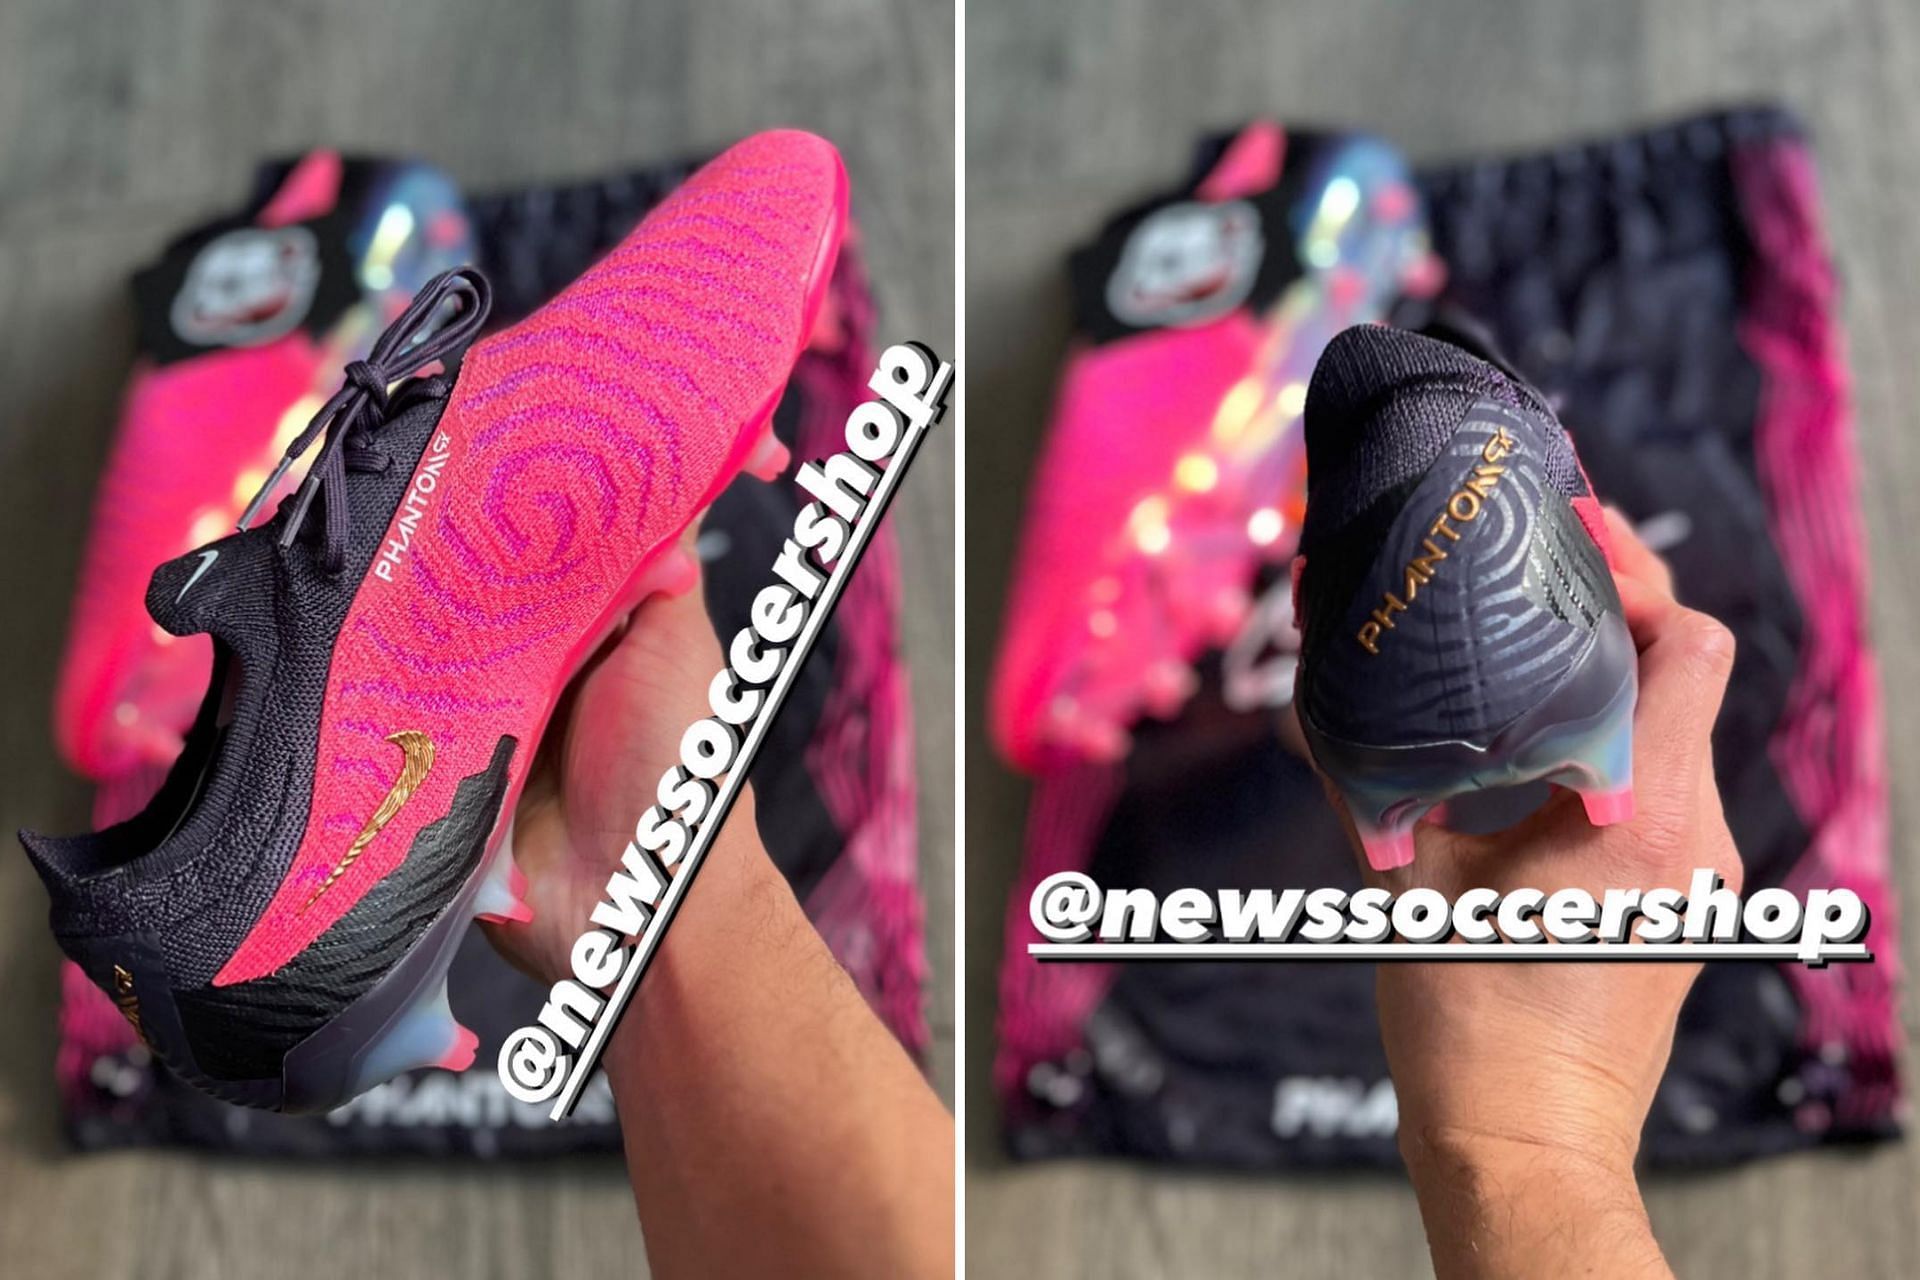 Upcoming Nike Phantom GX &#039;Disruption&#039; football boots coming clad in &#039;Hyper Pink / Black / White / Metallic Copper&#039; color scheme (Image via @newssoccershop/ Instagram)